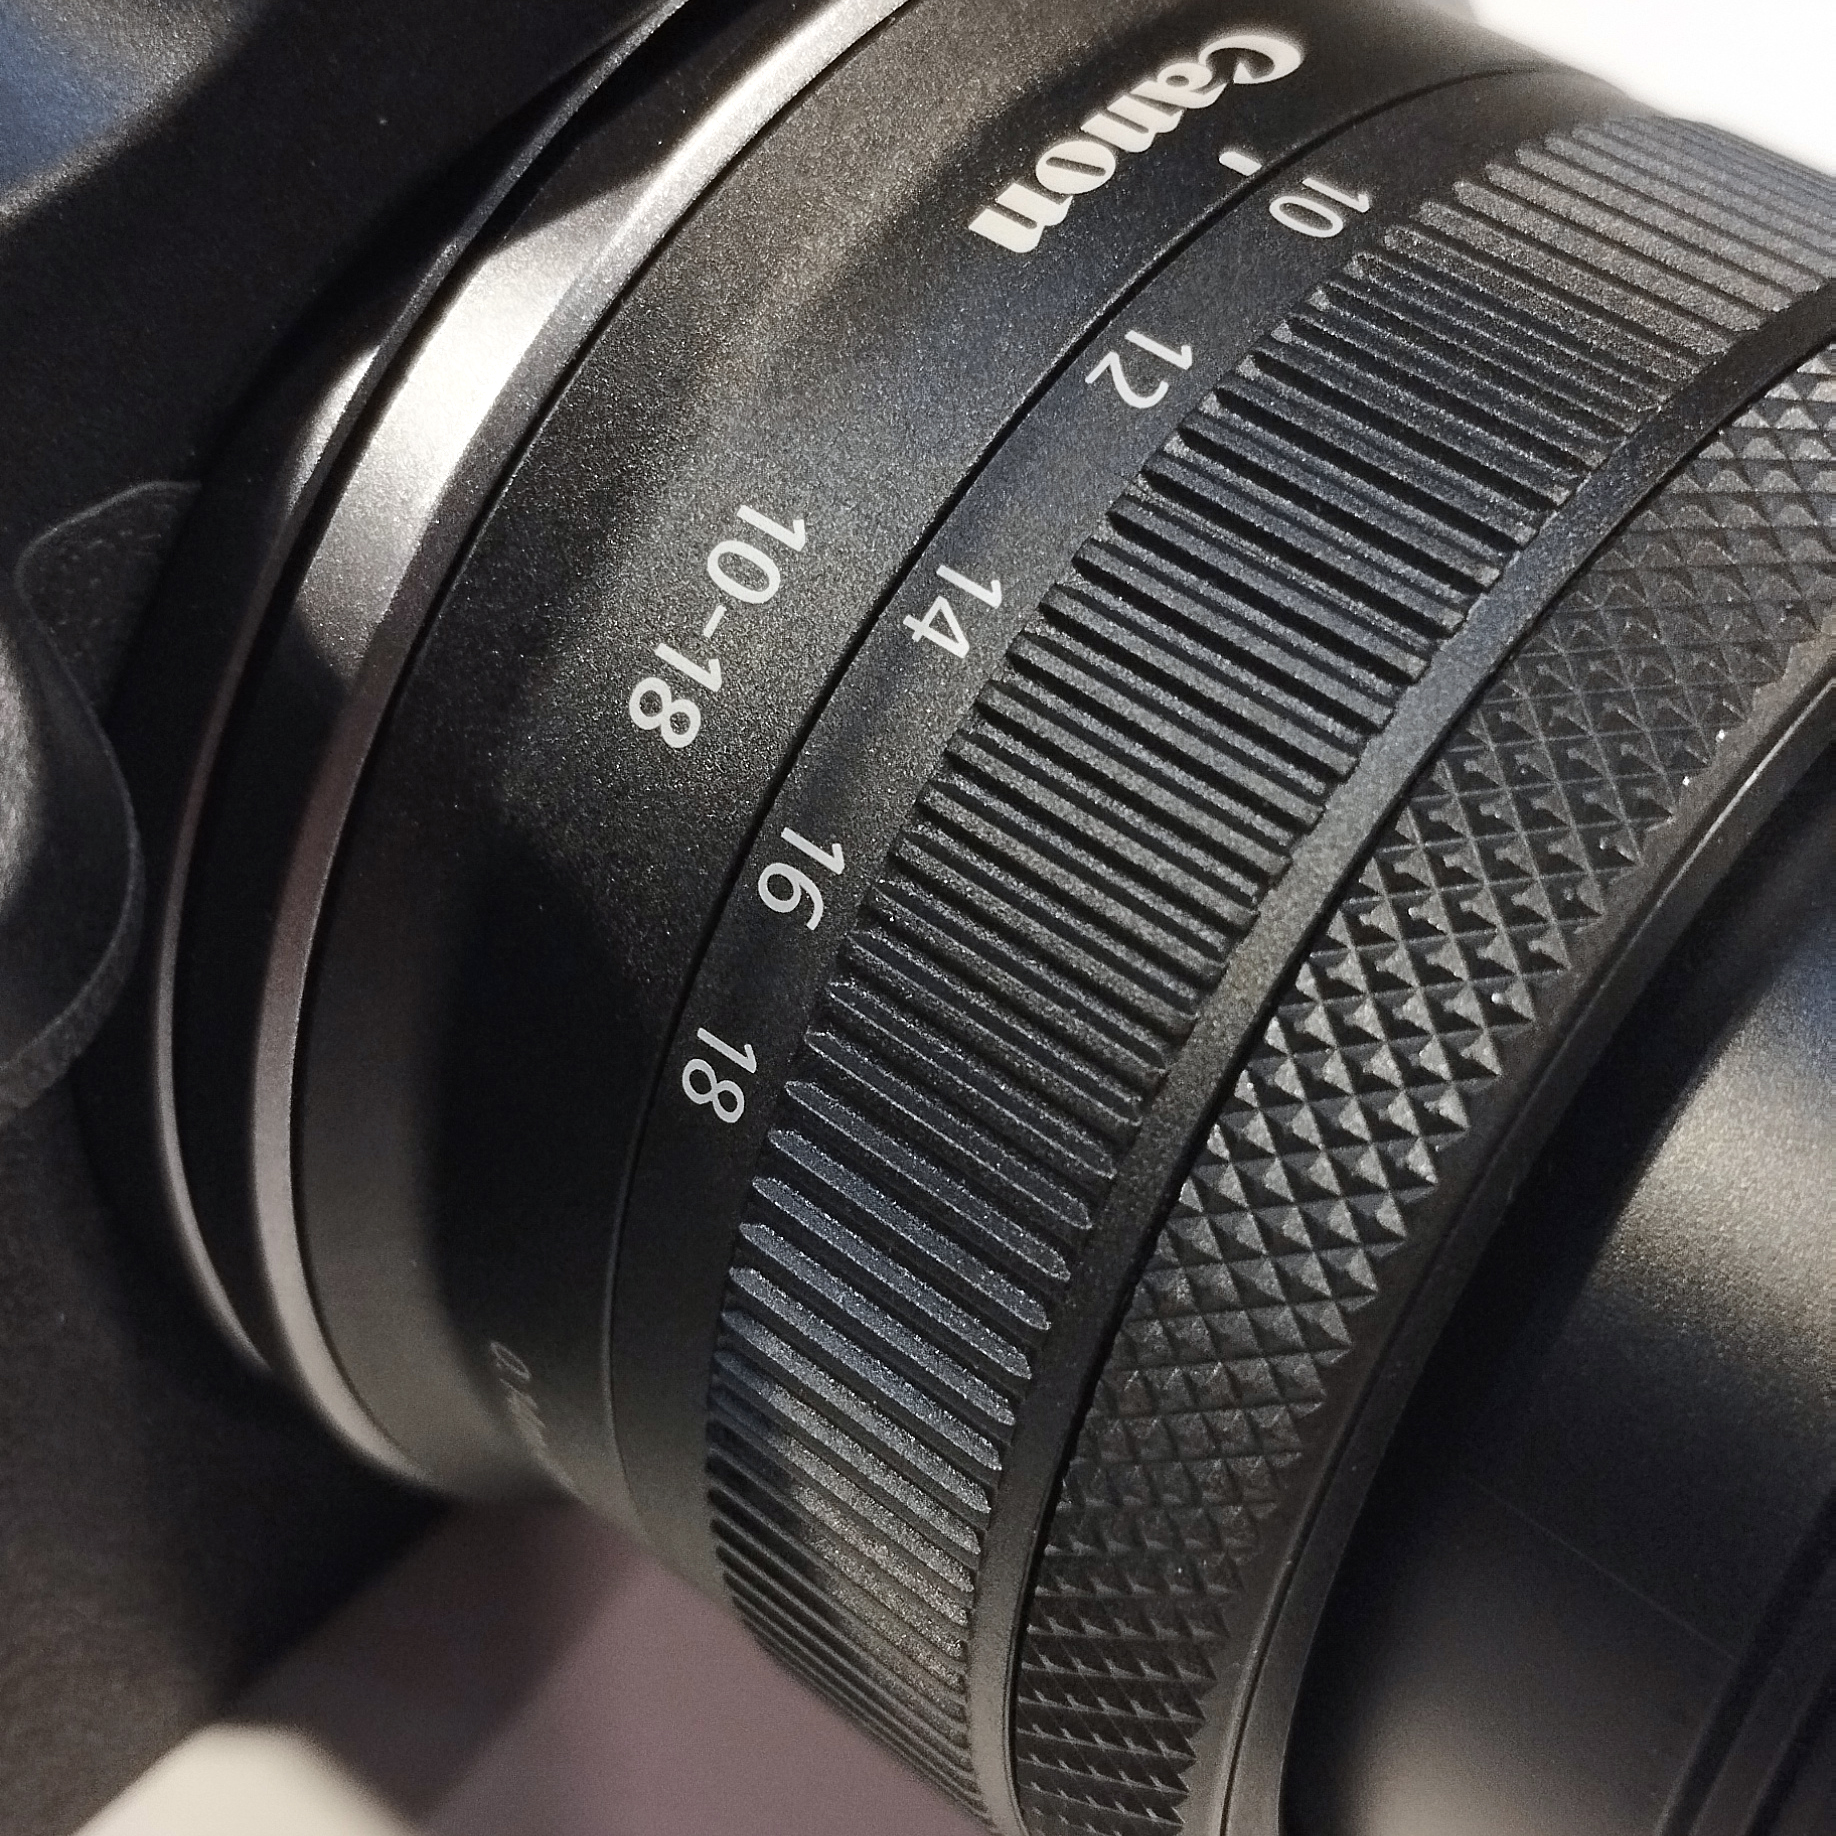 rfs1018l01 - Here is the unannounced Canon RF-S 10-18mm f/4.5-6.3 IS STM